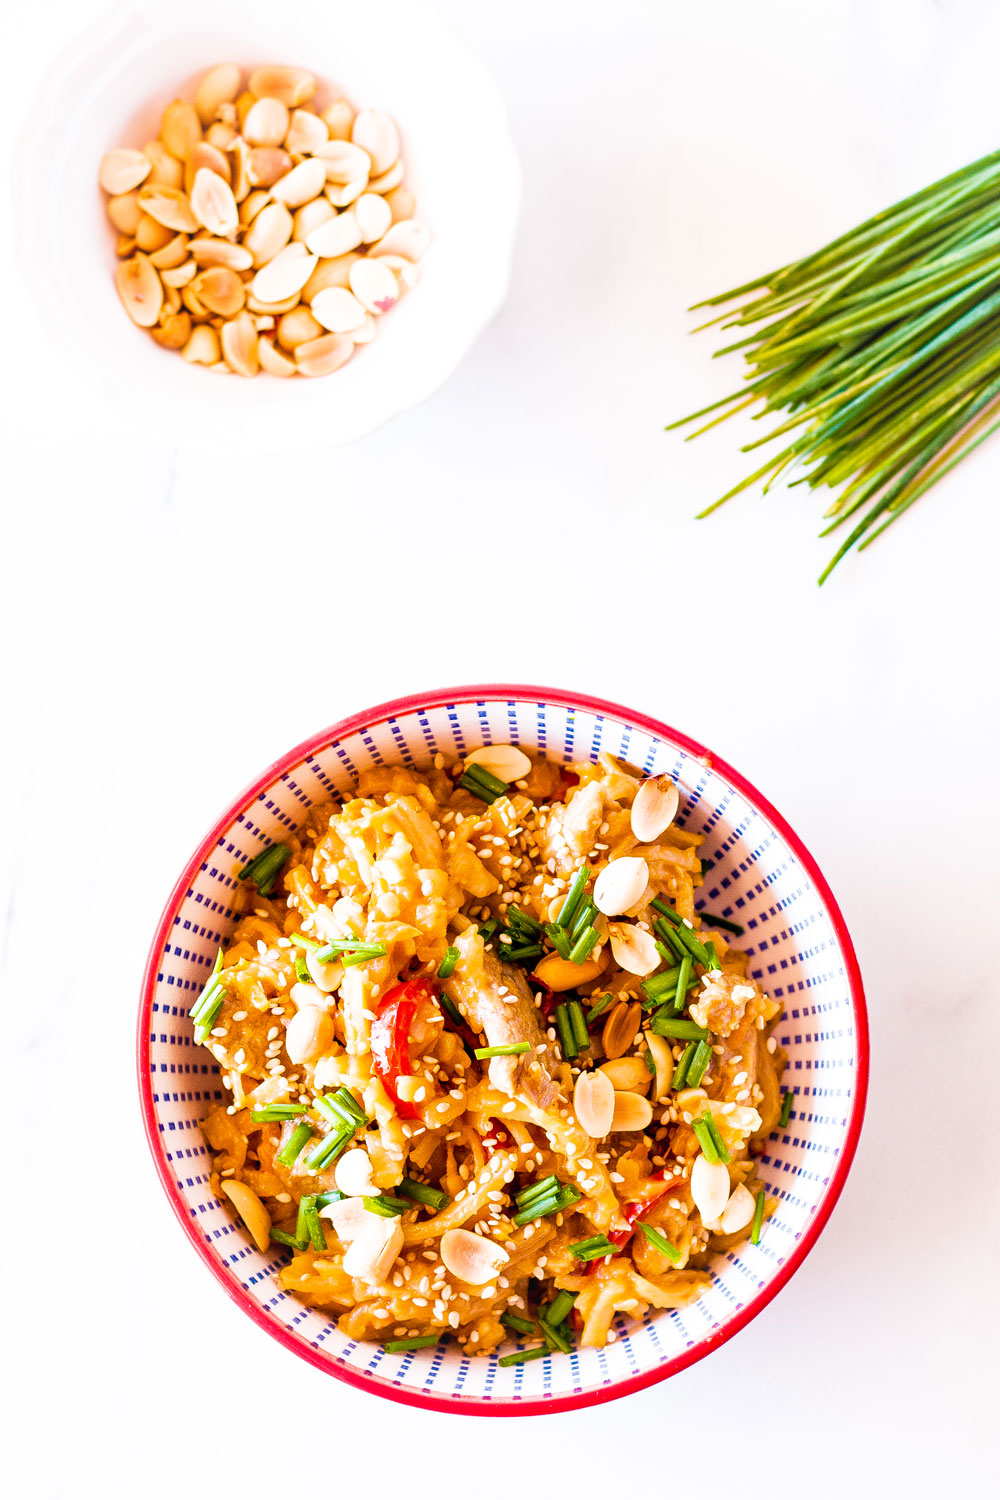 This 20-Minute Creamy Pork Pad Thai Recipe is easy and simple enough for any aspiring Thai cook to make. A hearty, filling, comforting dish with tons of texture, protein, and big flavor! https://www.spotebi.com/recipes/20-minute-creamy-pork-pad-thai-recipe/